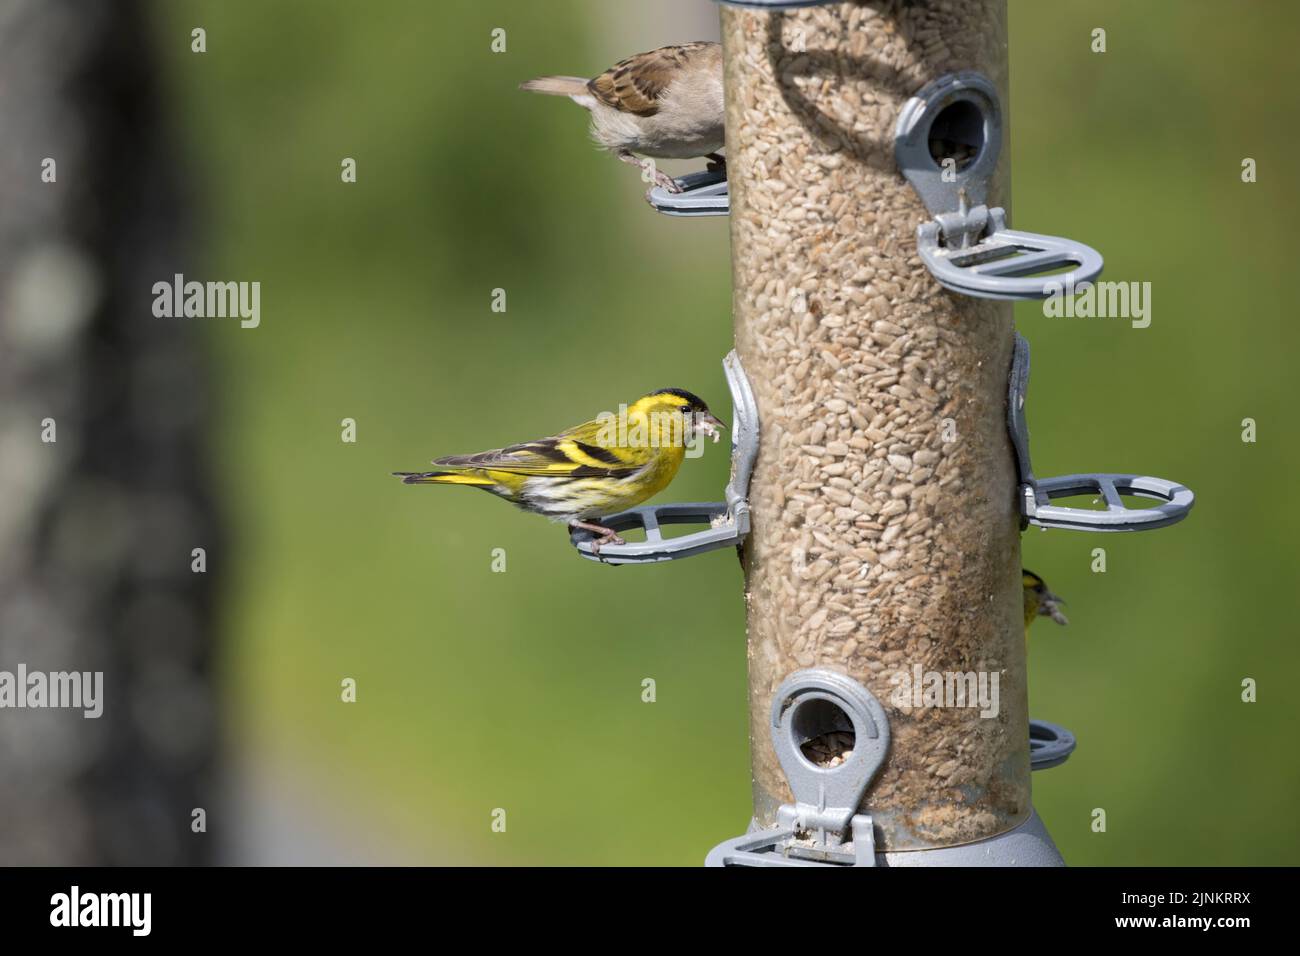 Single Siskin on bird feeder Bwlch Nant yr Arian; Visitor Centre West Wales UK Stock Photo